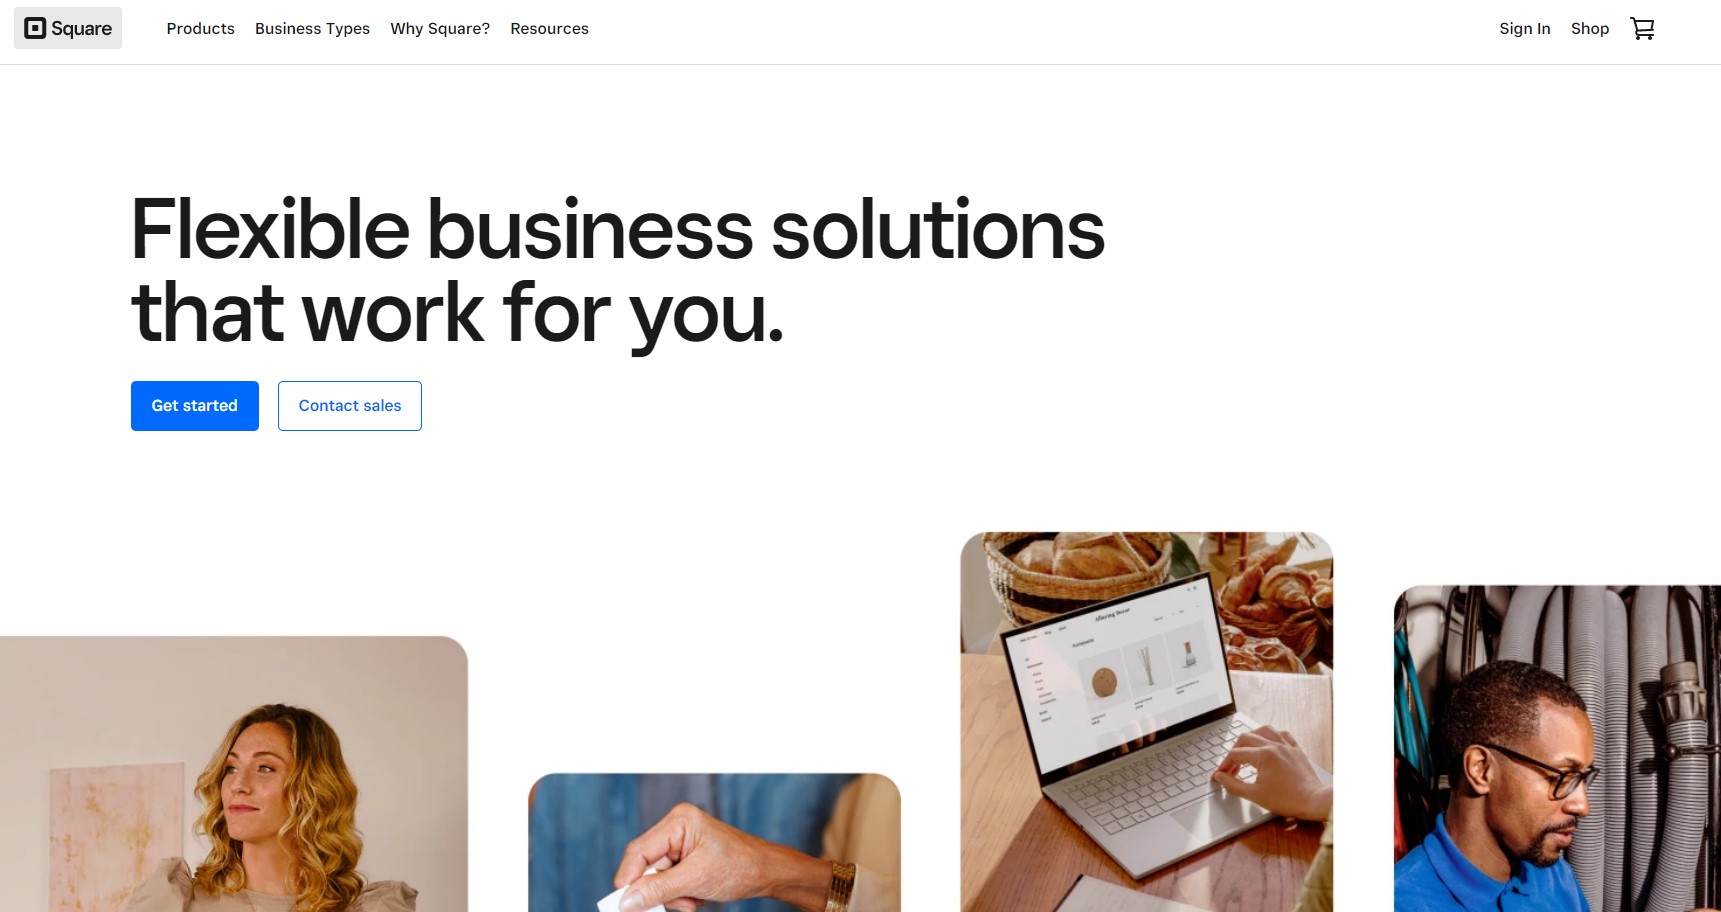 square-online-is-a-cloud-based-ecommerce-solution-that-provides-small-businesses-with-tools-to-design-websites